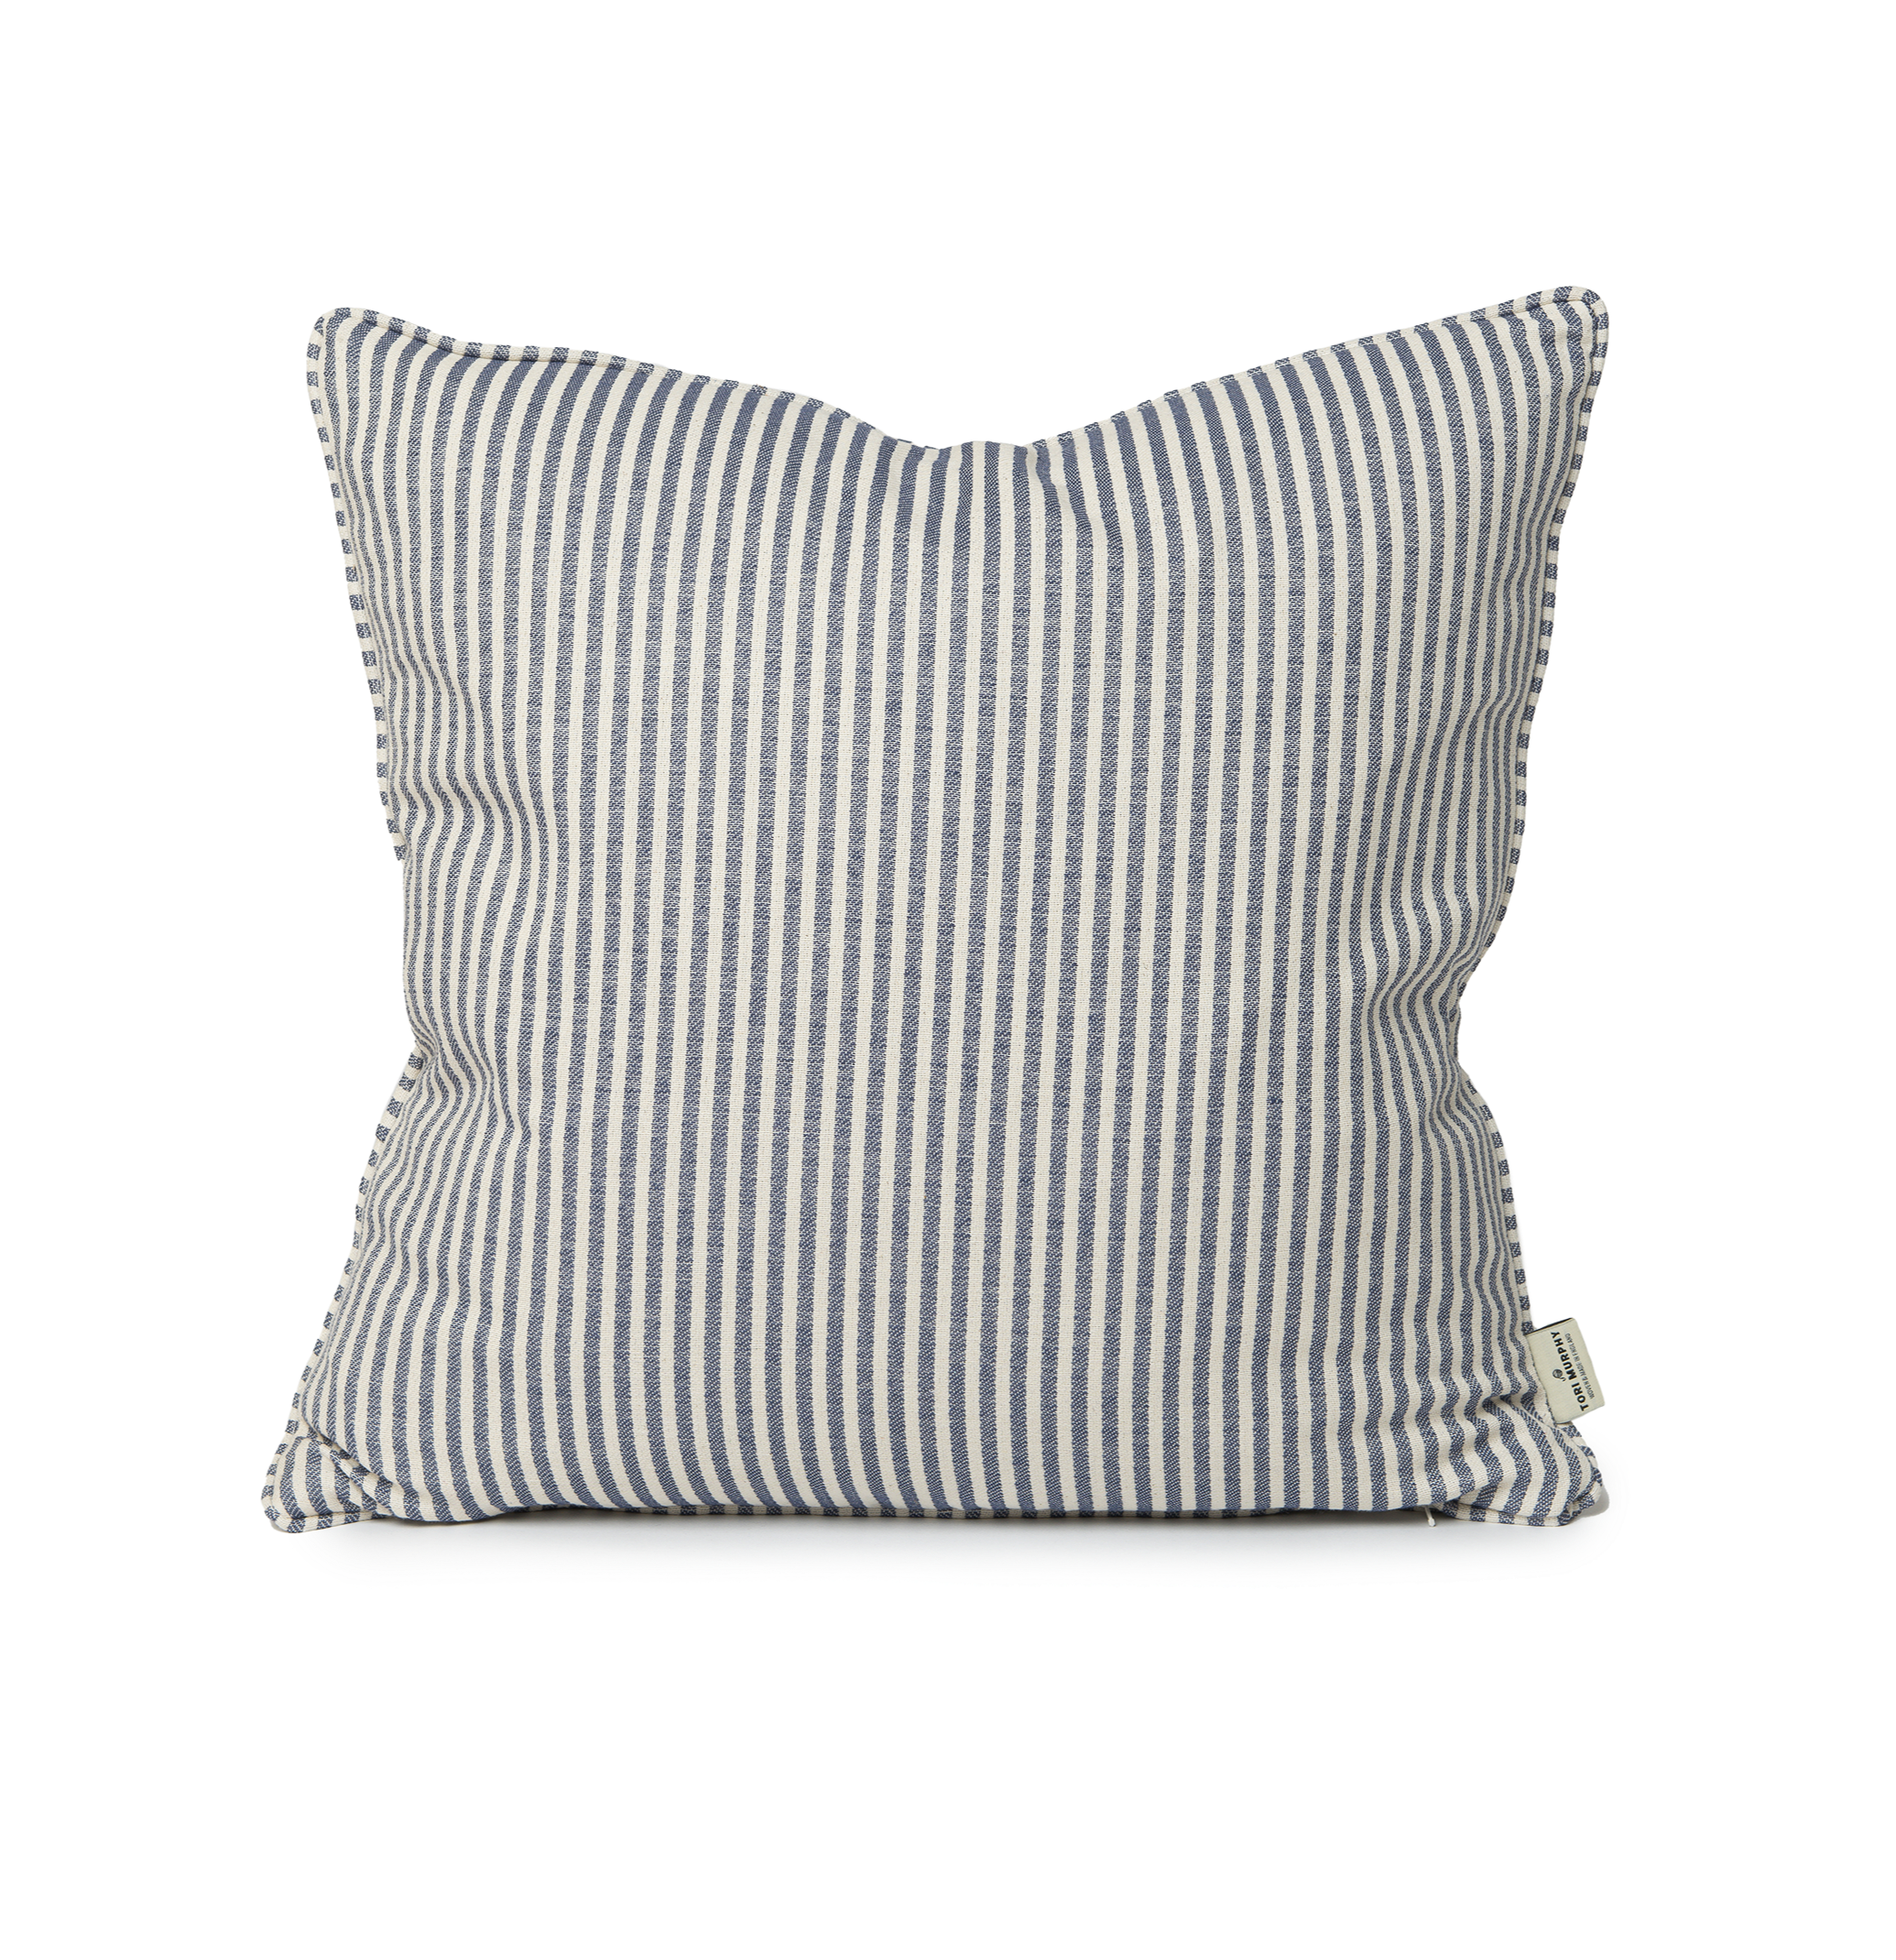 Harbour Stripe Piped Cushion Navy